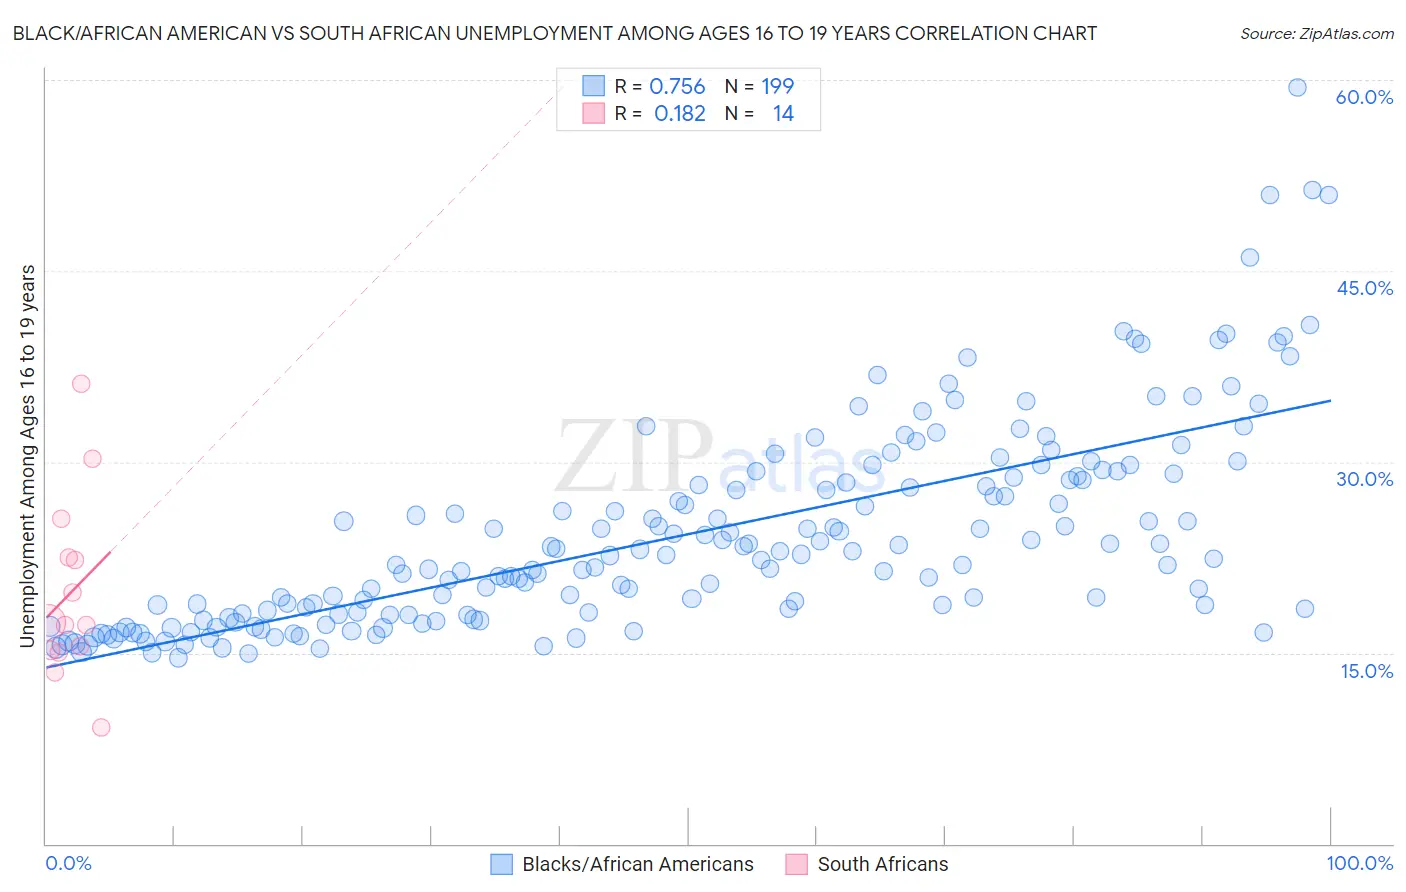 Black/African American vs South African Unemployment Among Ages 16 to 19 years